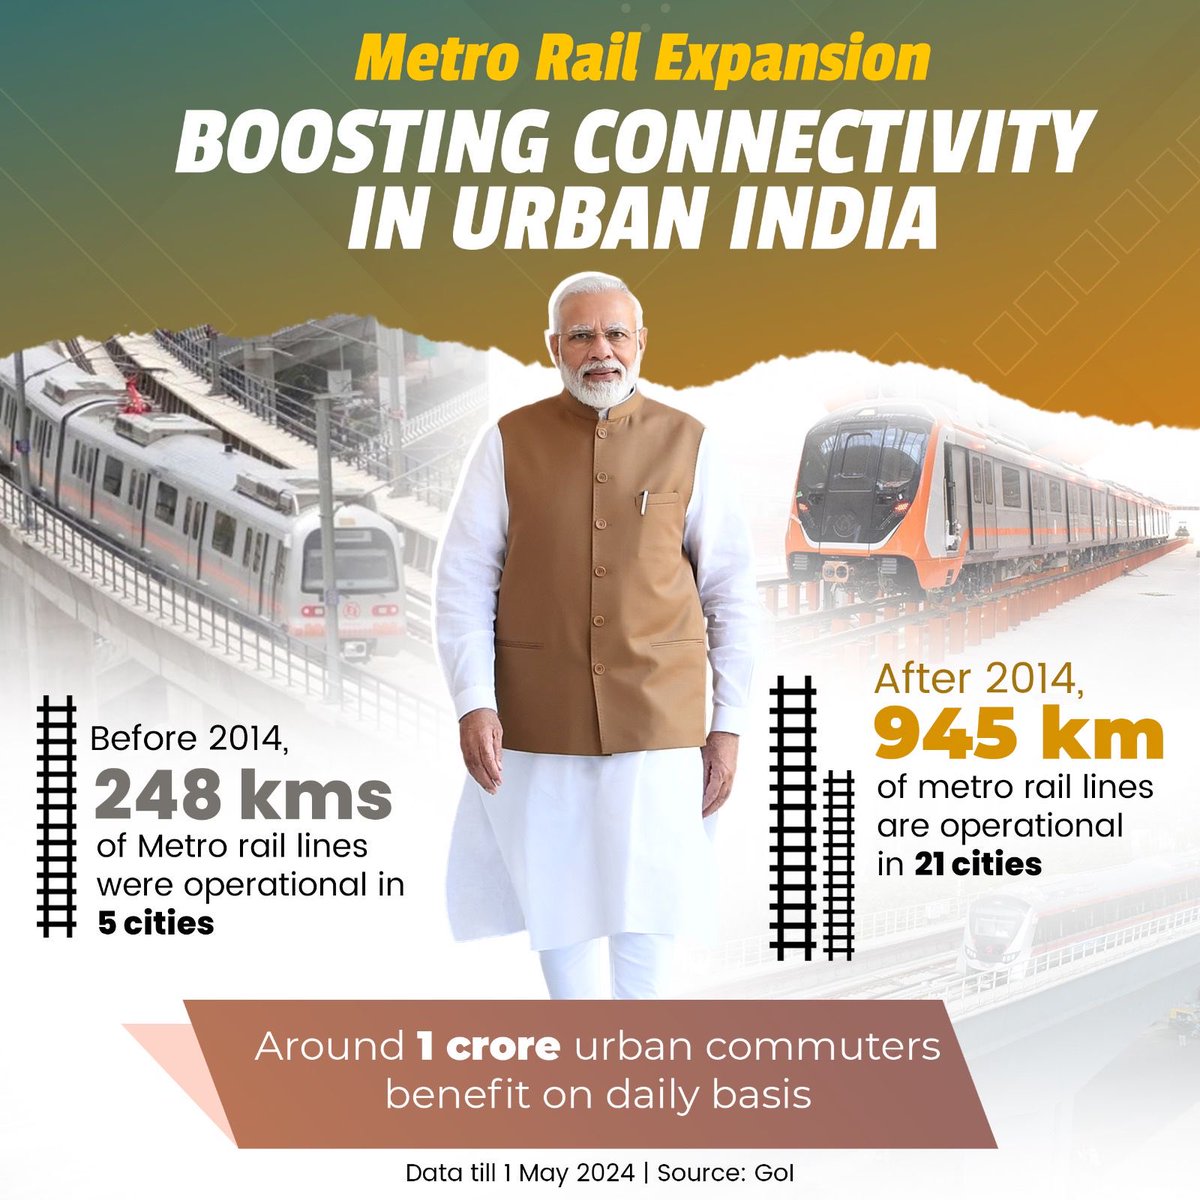 PM @narendramodi govt: Boosting connectivity, ensuring ease of living Before 2014: 248 km of metro rail across 5 cities. After 2014: Expanded to 945 km across 21 cities #PhirEkBaarModiSarkar #ModiKiGuarantee